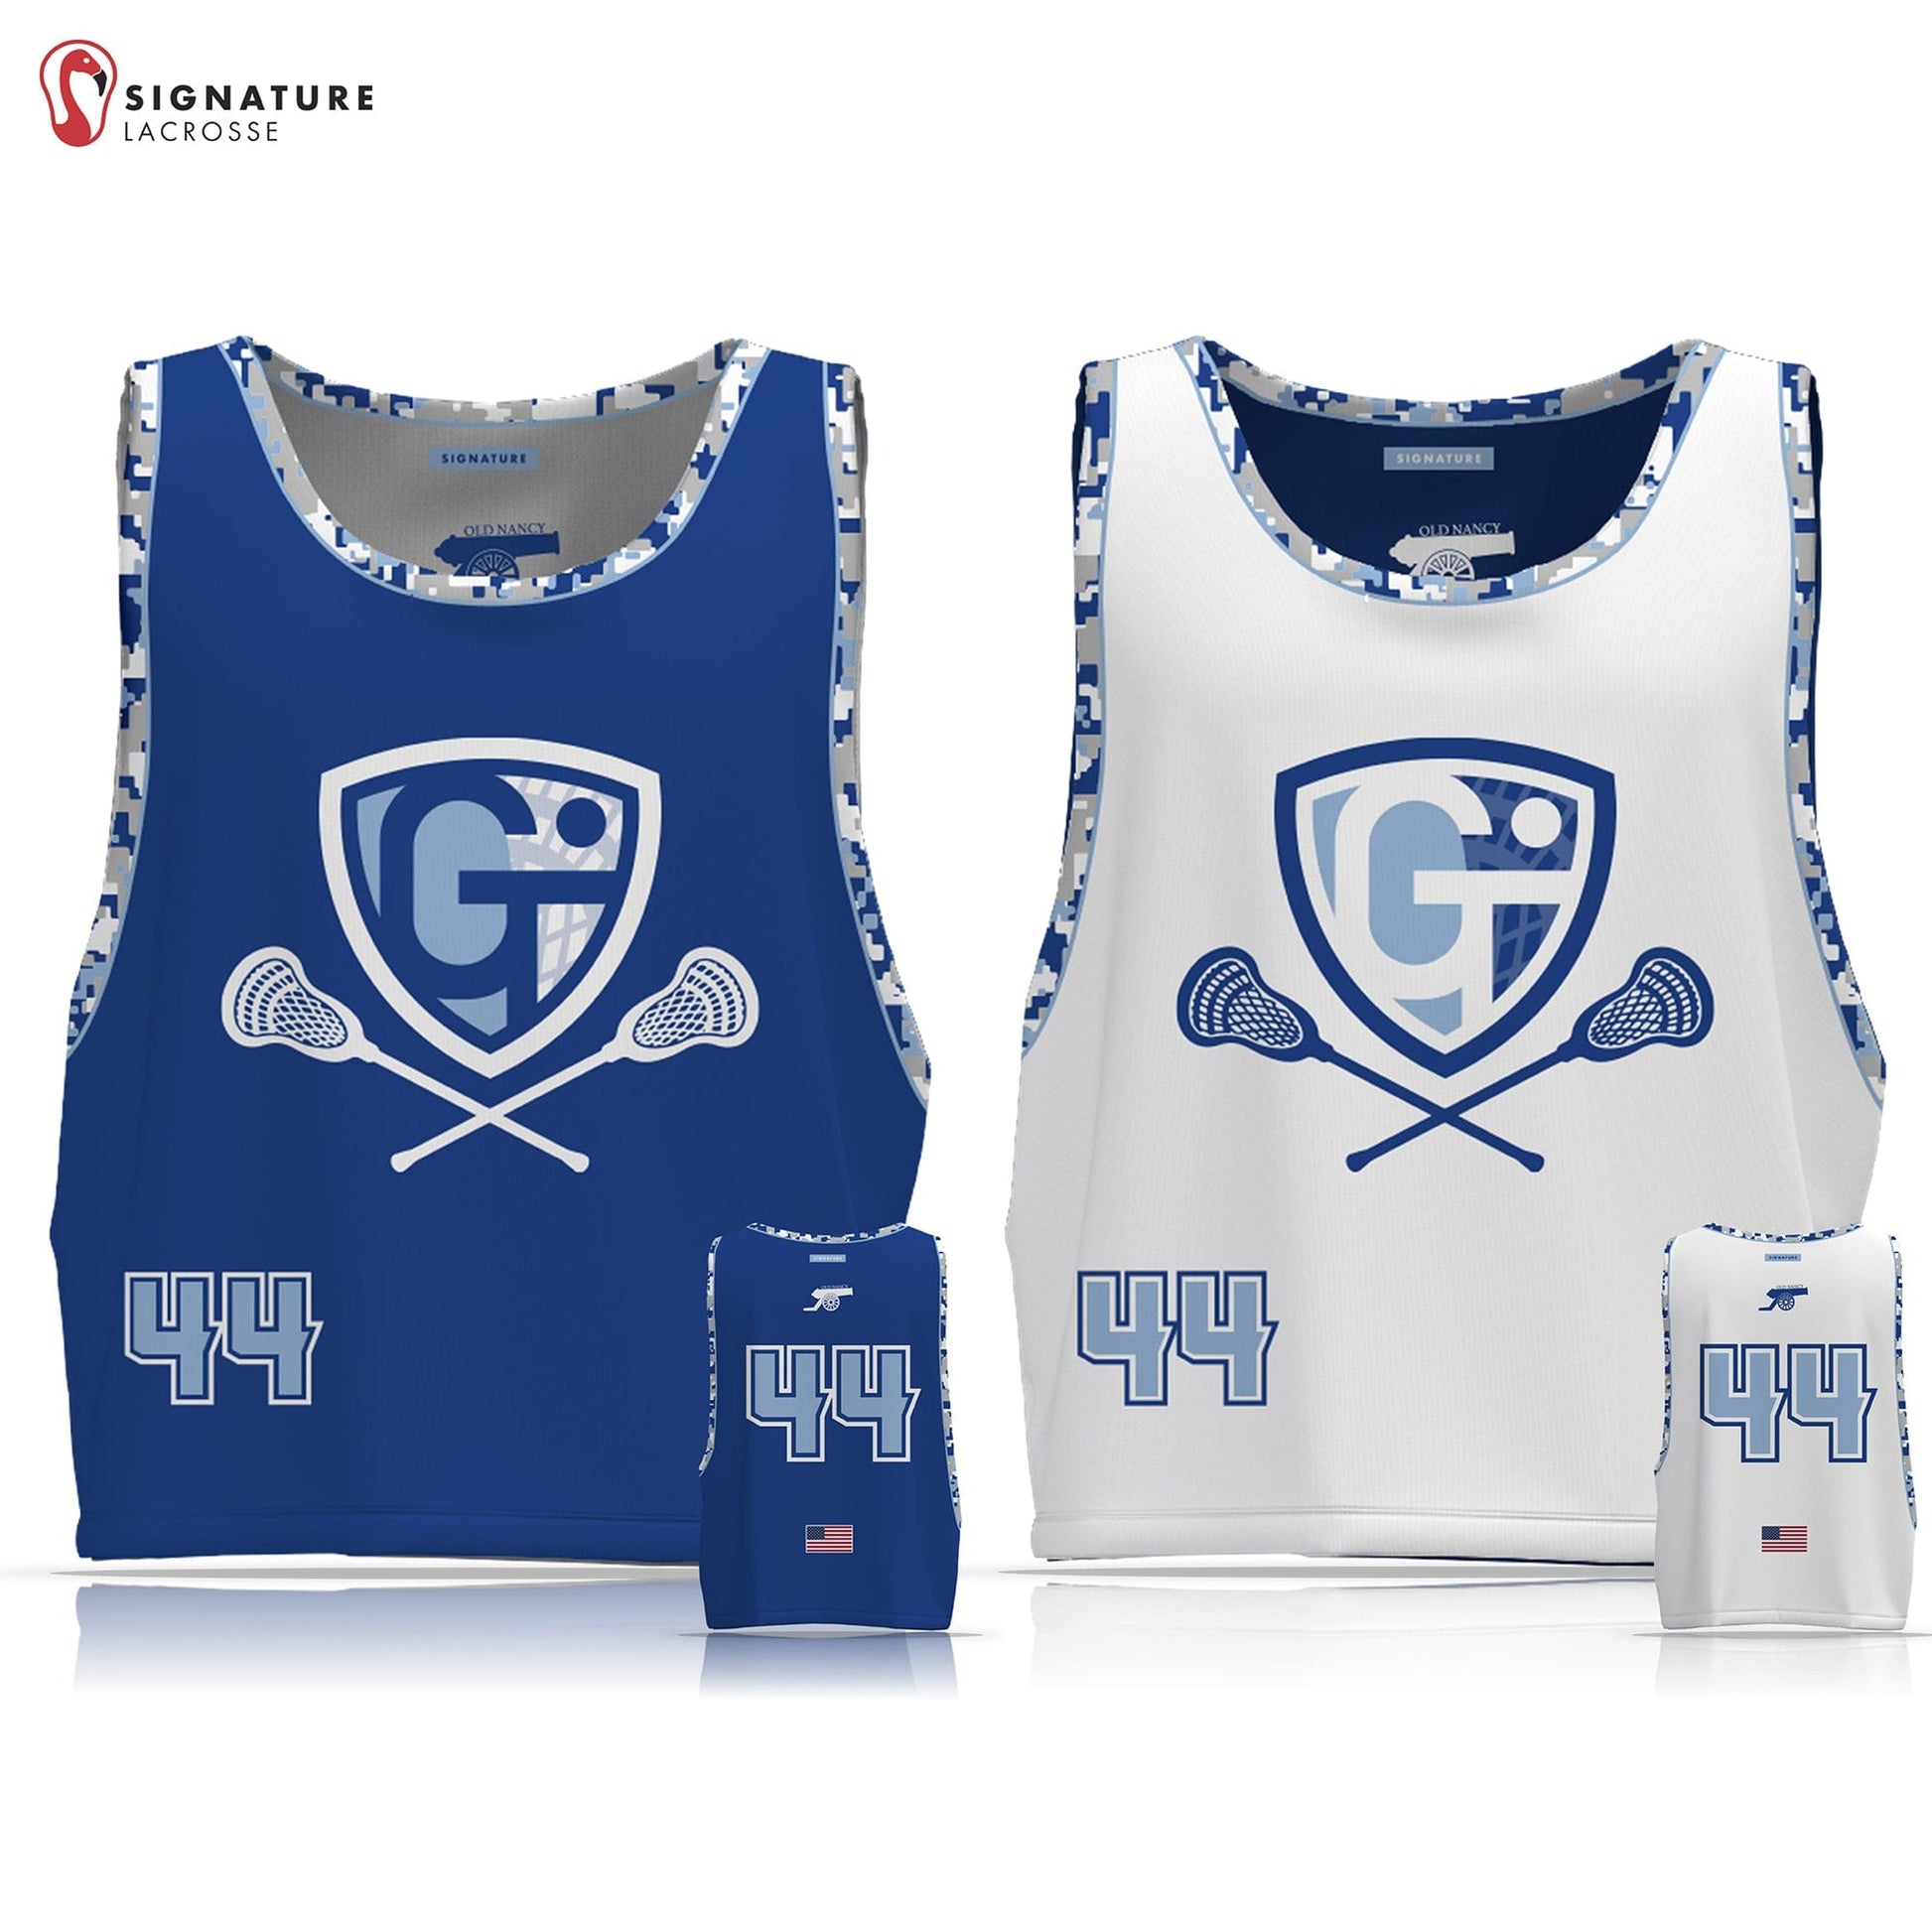 Georgetown-Trition Youth Lacrosse Men's Player Reversible Game Pinnie: 5-6 Signature Lacrosse